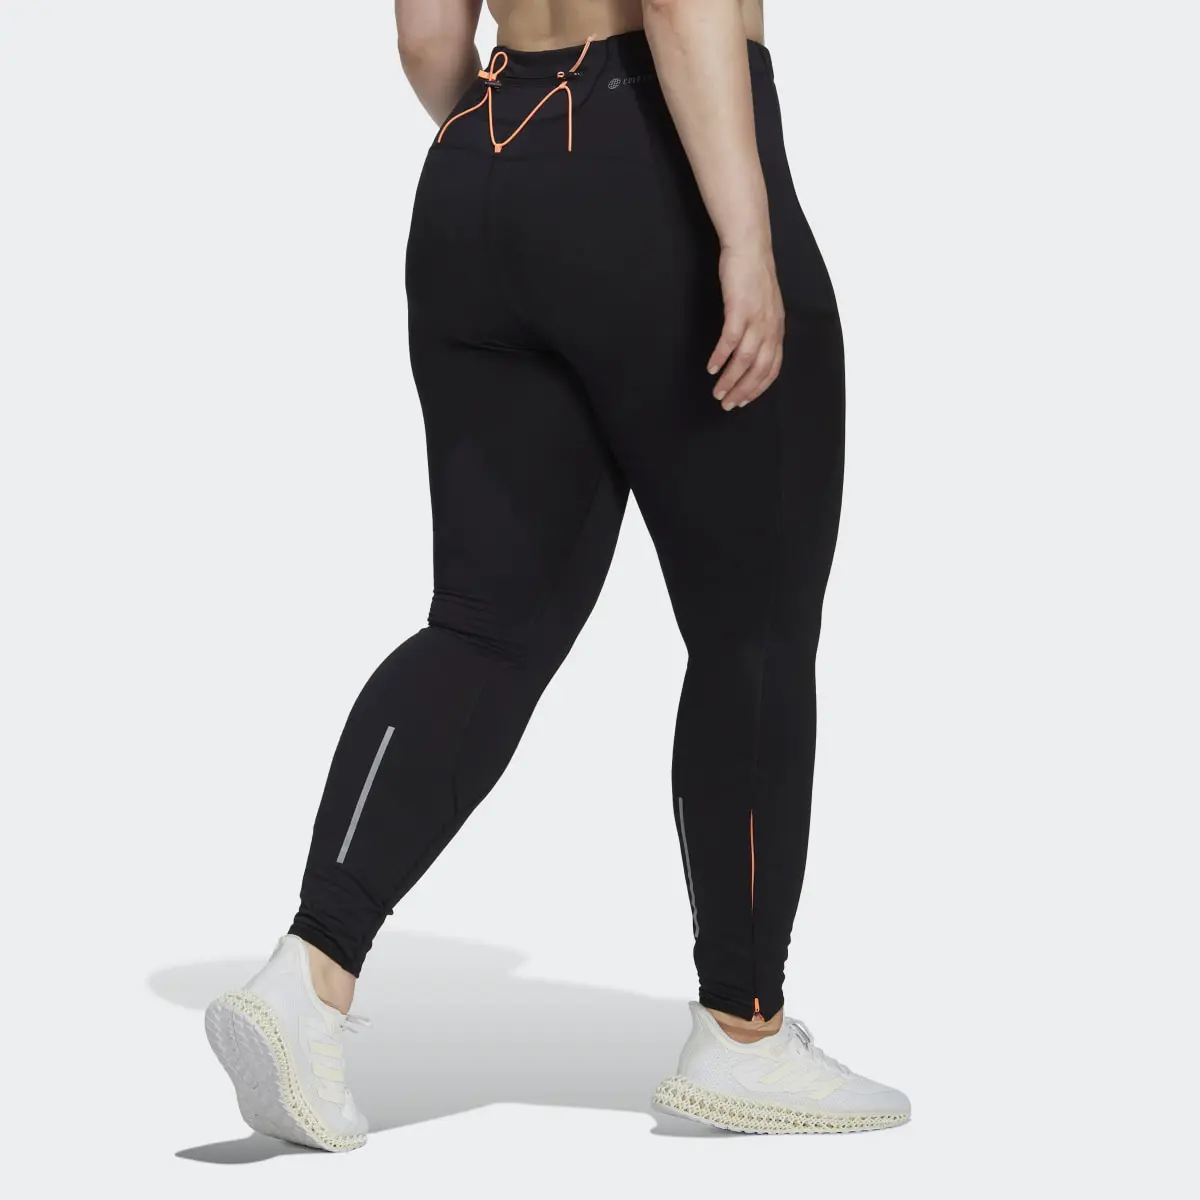 Adidas FastImpact COLD.RDY Winter Running Long Leggings (Plus Size). 2